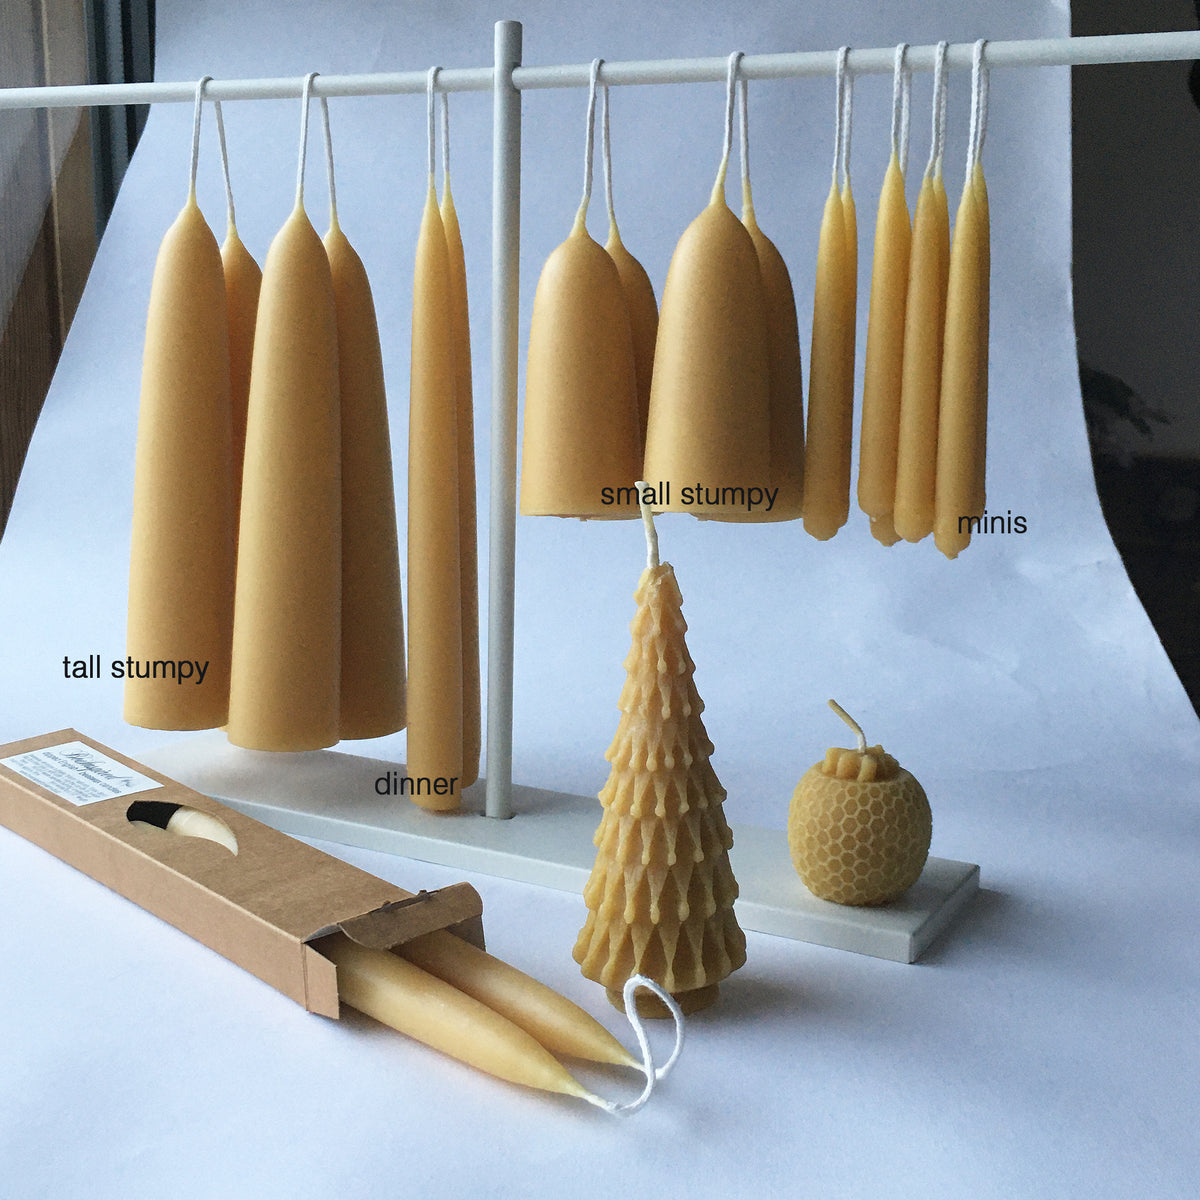 beeswax large stumpy candle dipped